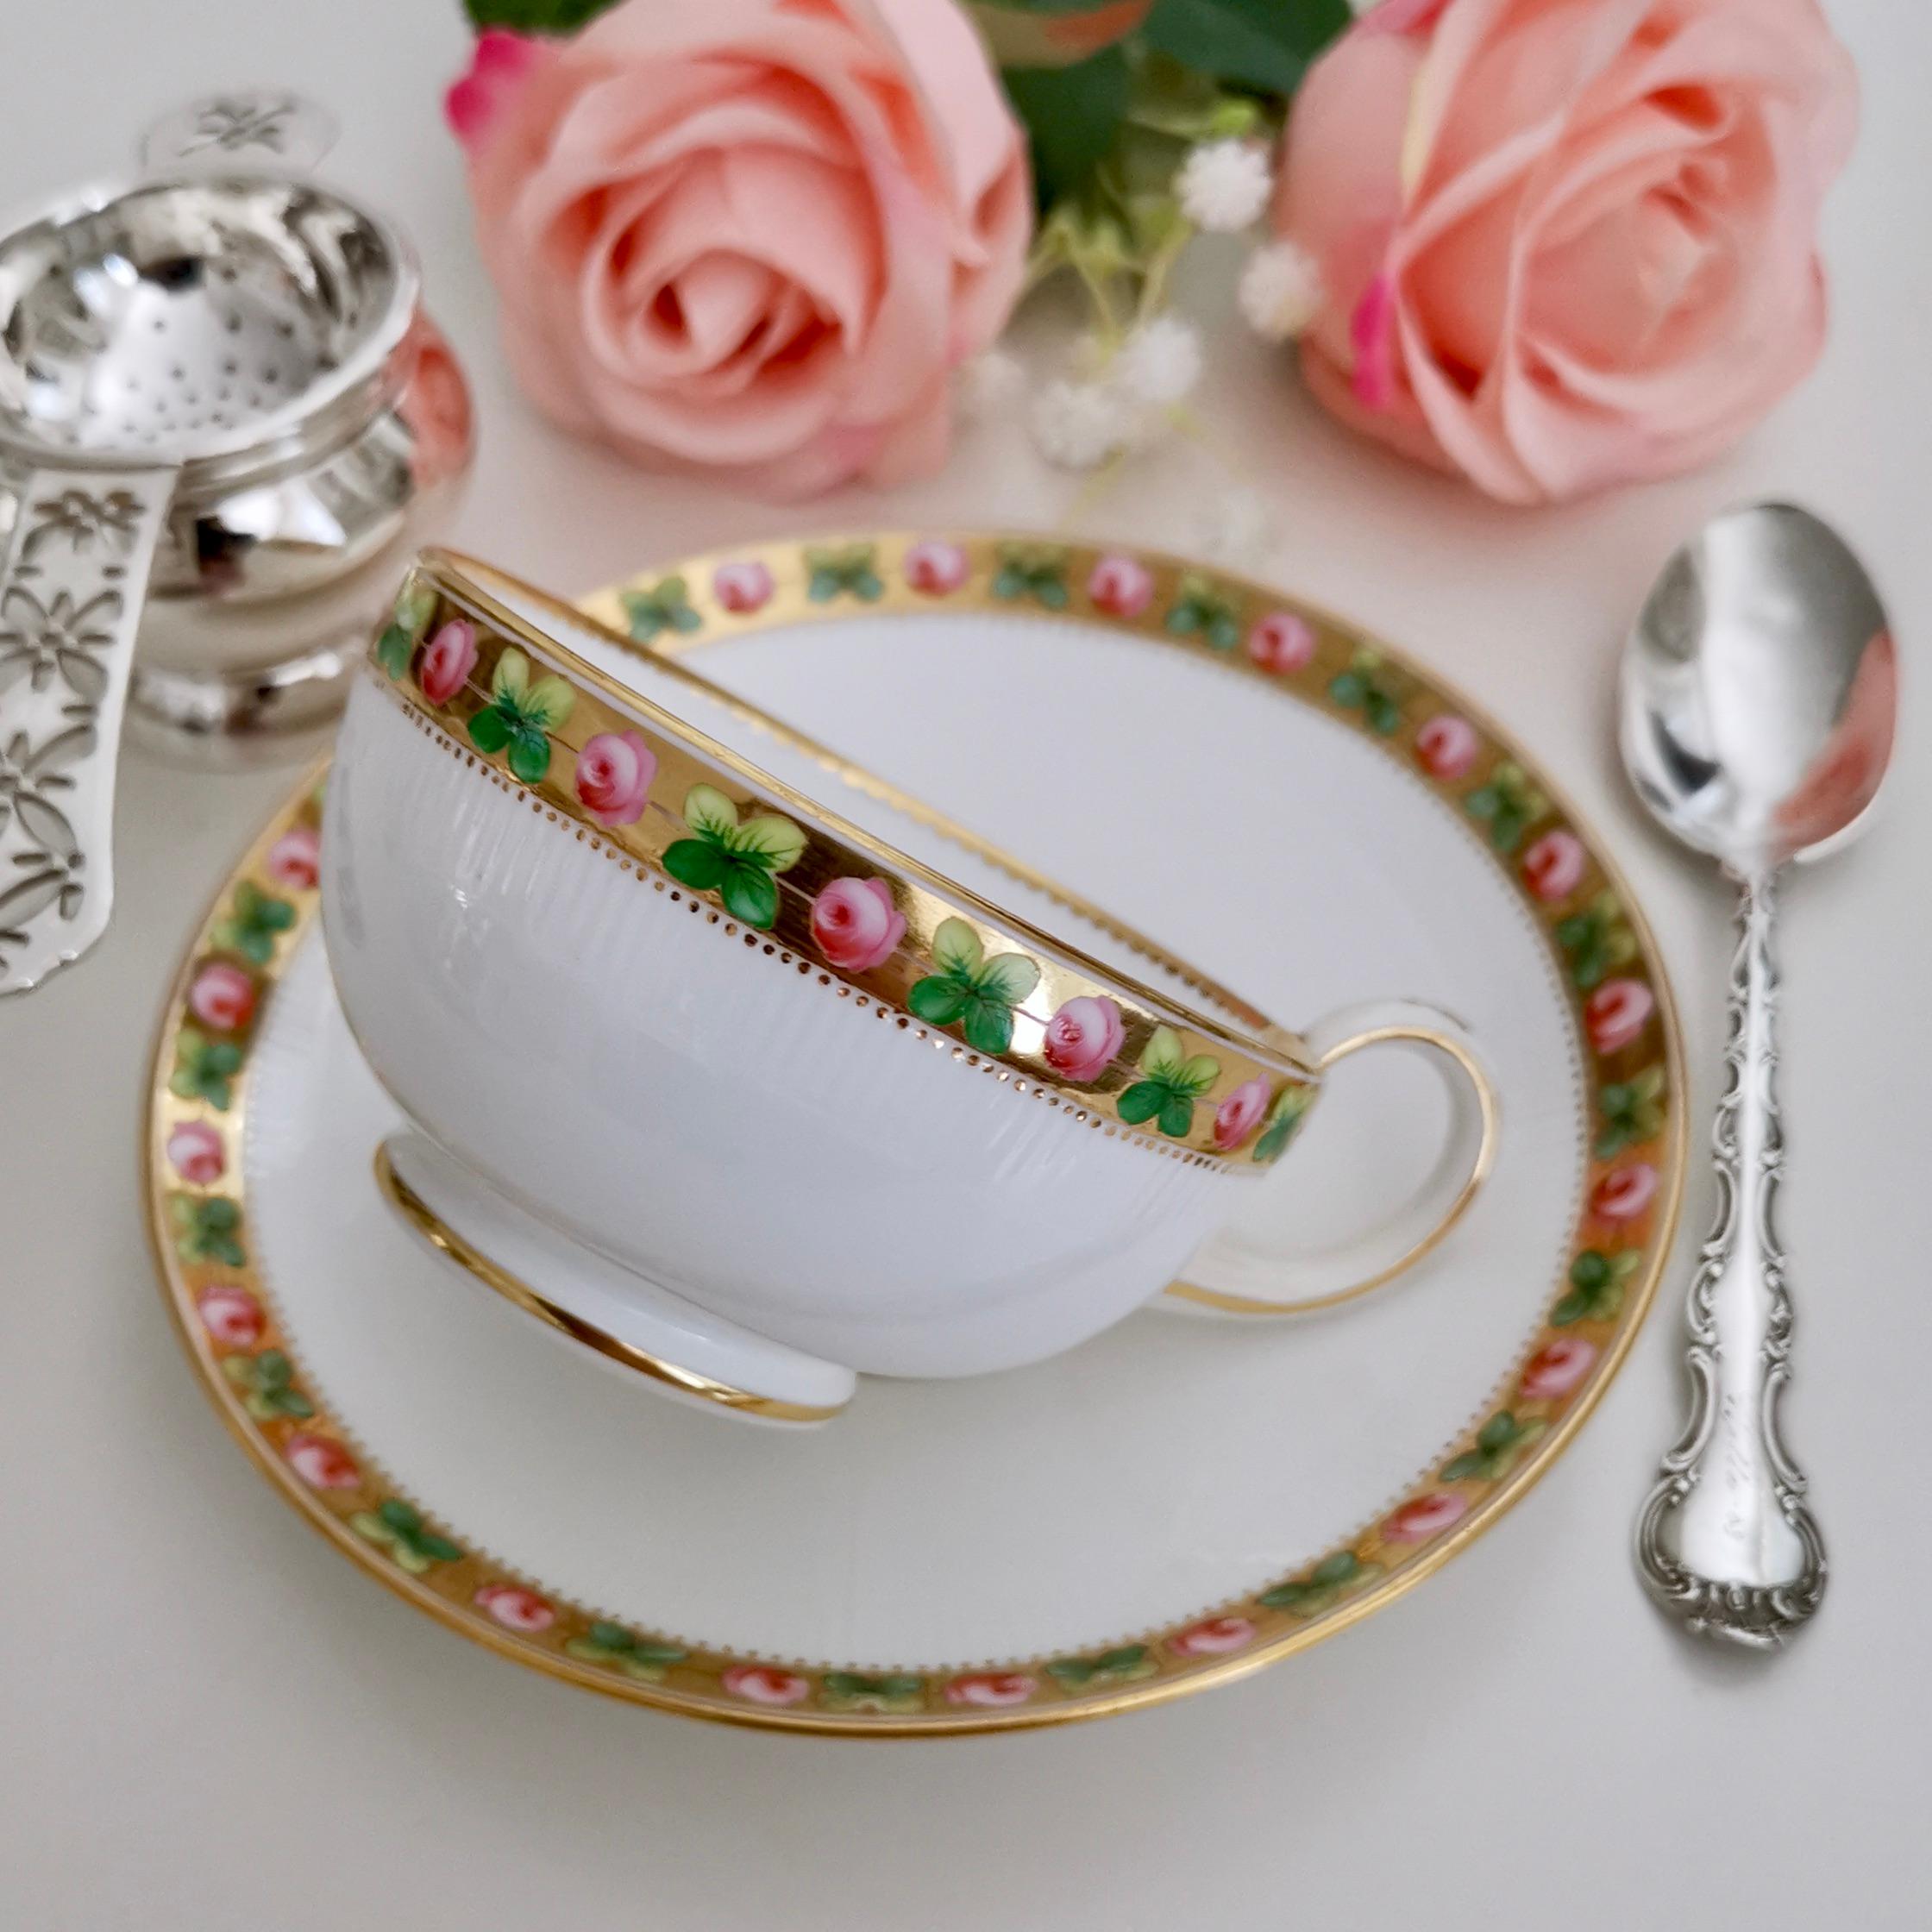 This is a beautiful teacup and saucer made by Minton in the year 1862.

Minton was one of the pioneers of English china production alongside other great potters such as Spode, Davenport, Ridgway, Coalport and others. They were located in